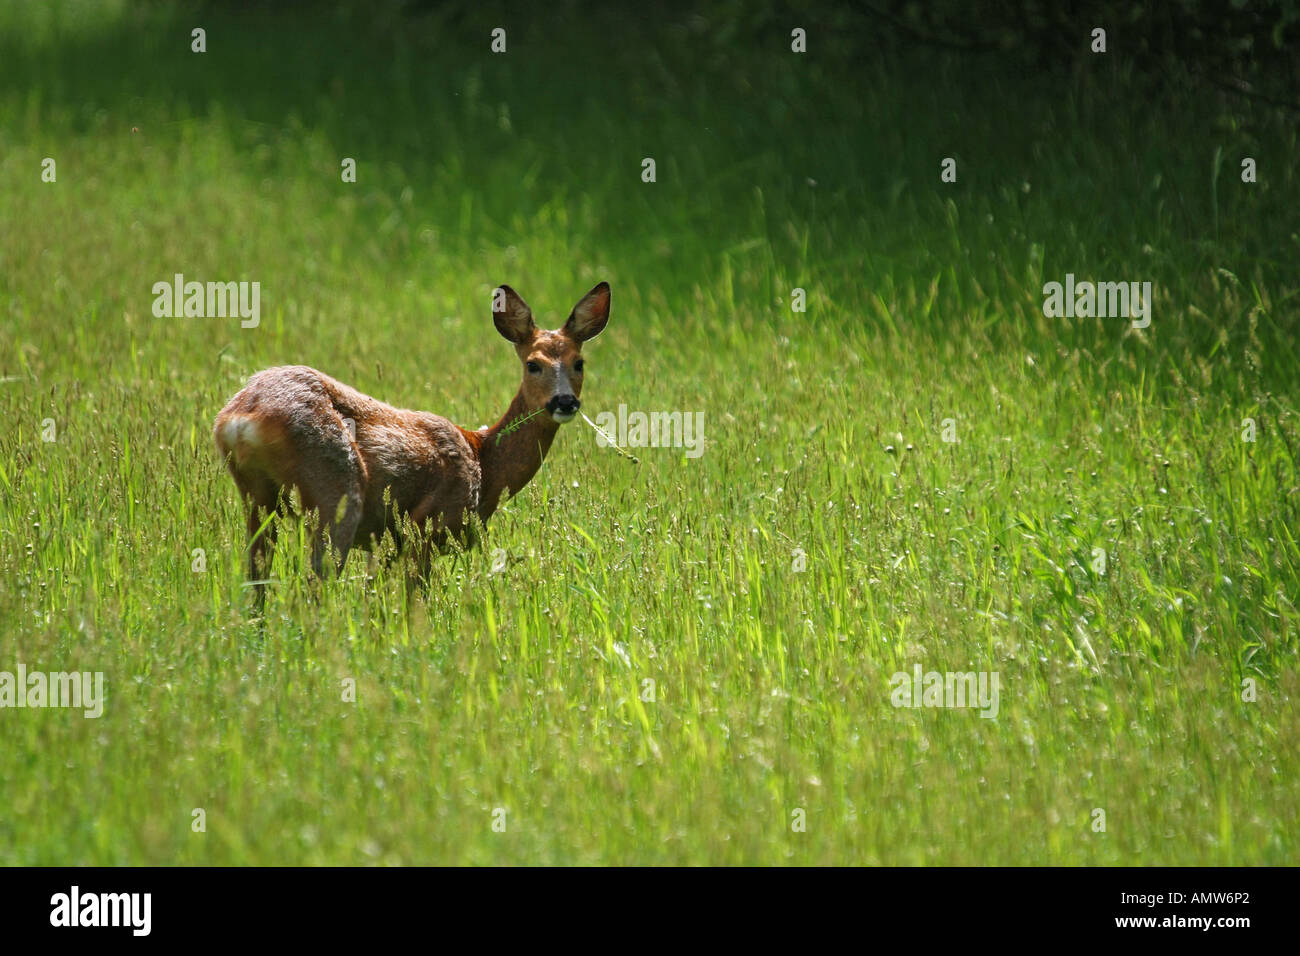 Grassing roe Capreolus capreolus in an meadow Stock Photo